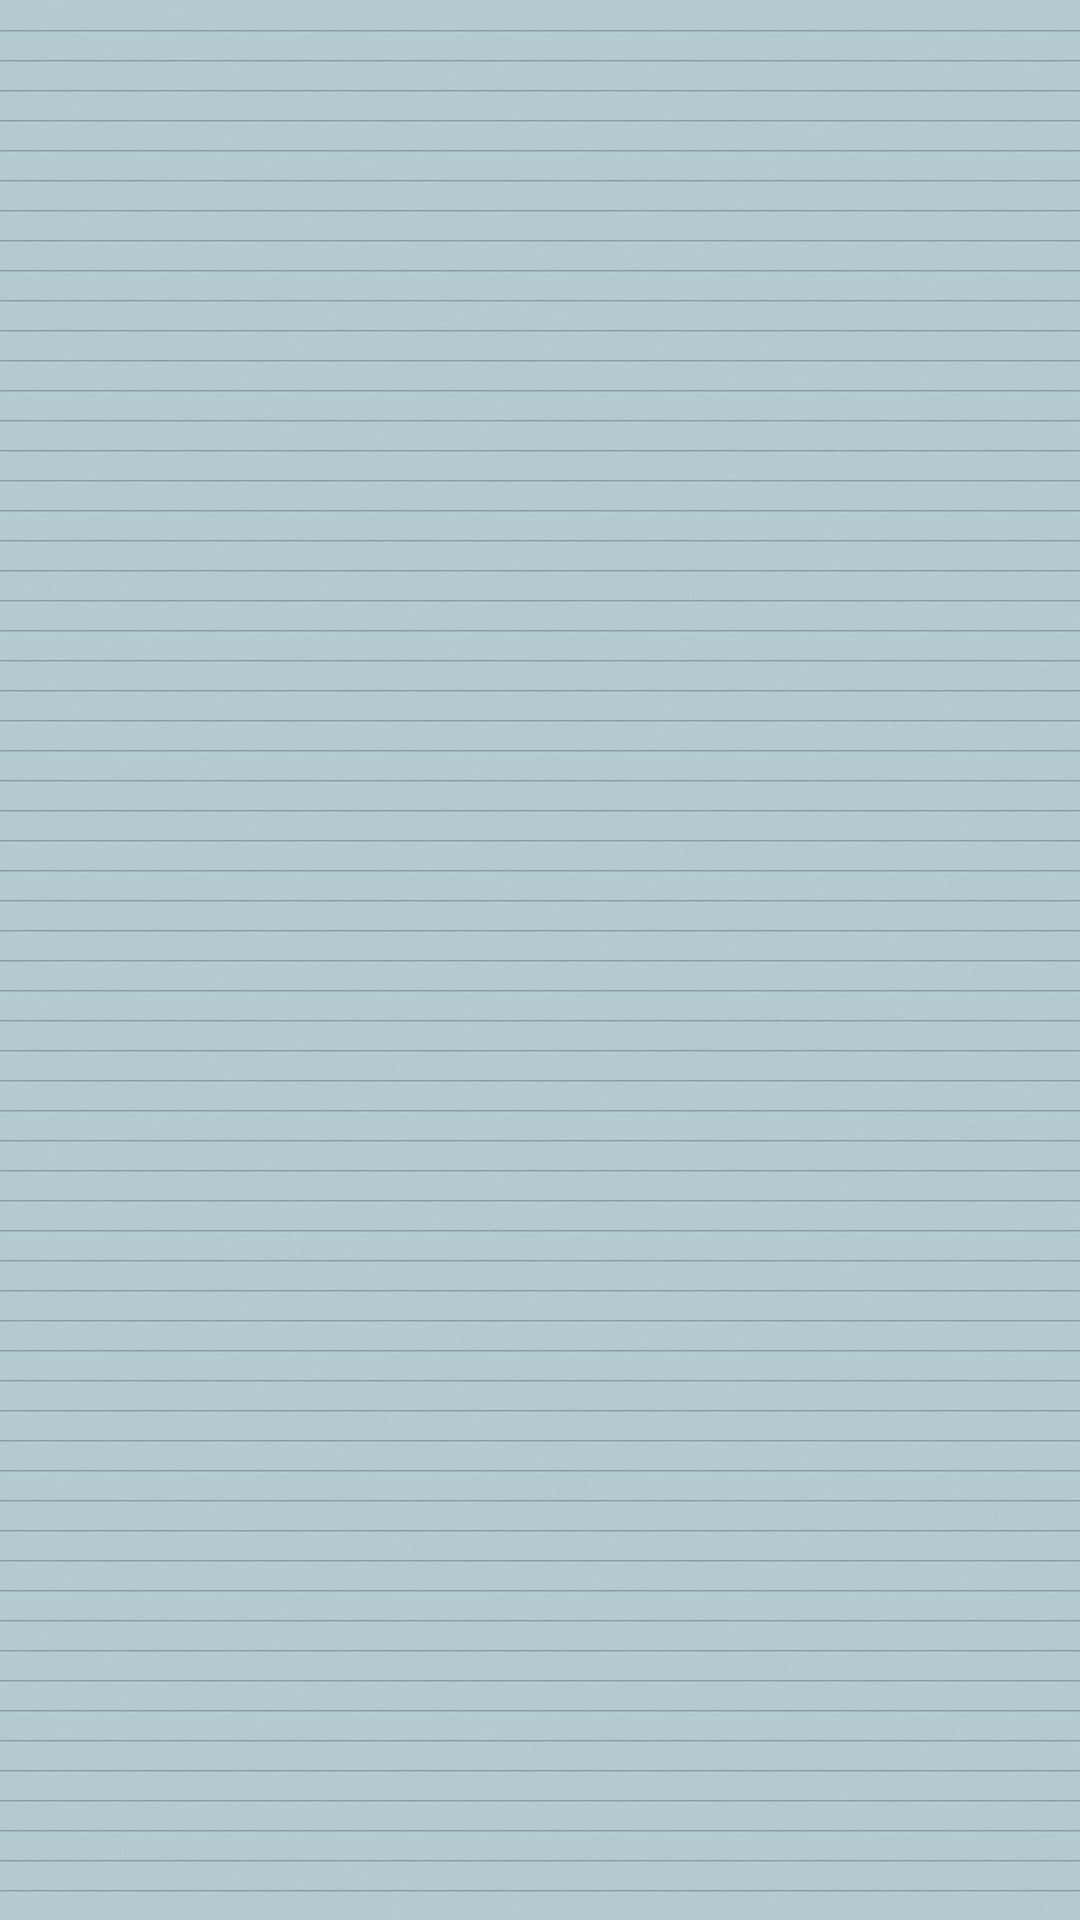 Blue Writing Lined Paper Background For Mobile Phone